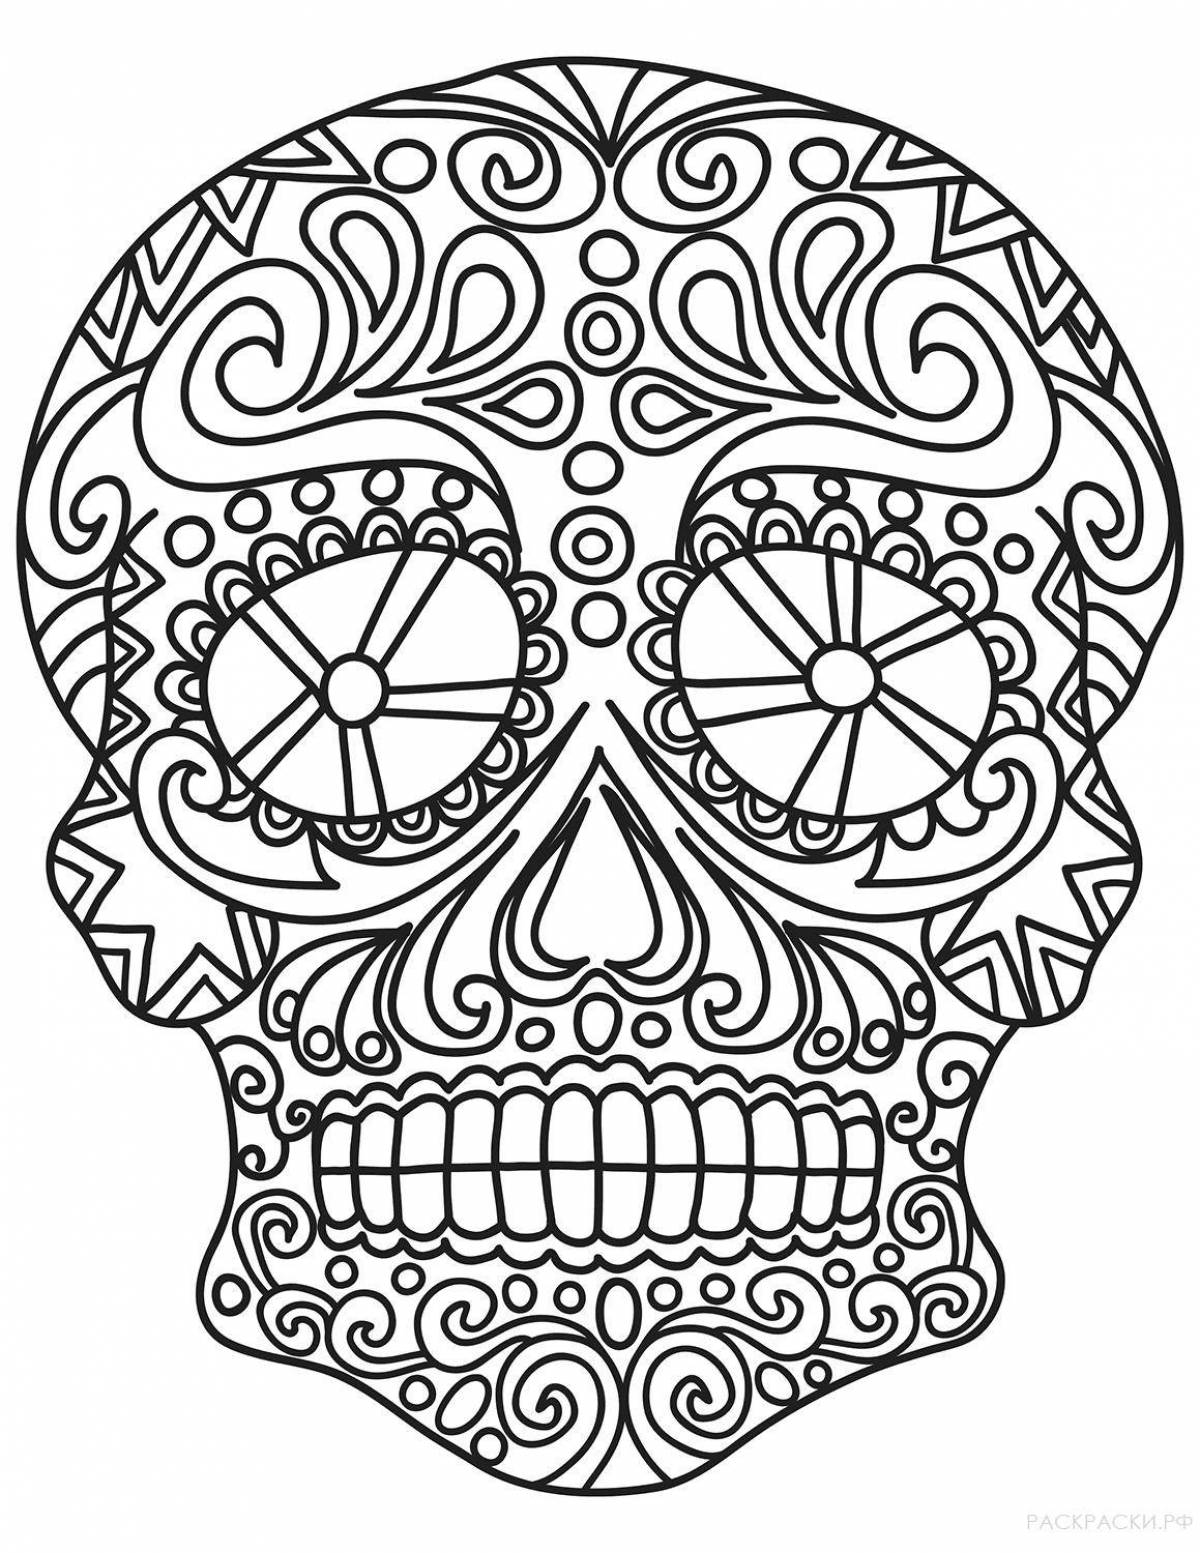 Quirky anti-stress skull coloring